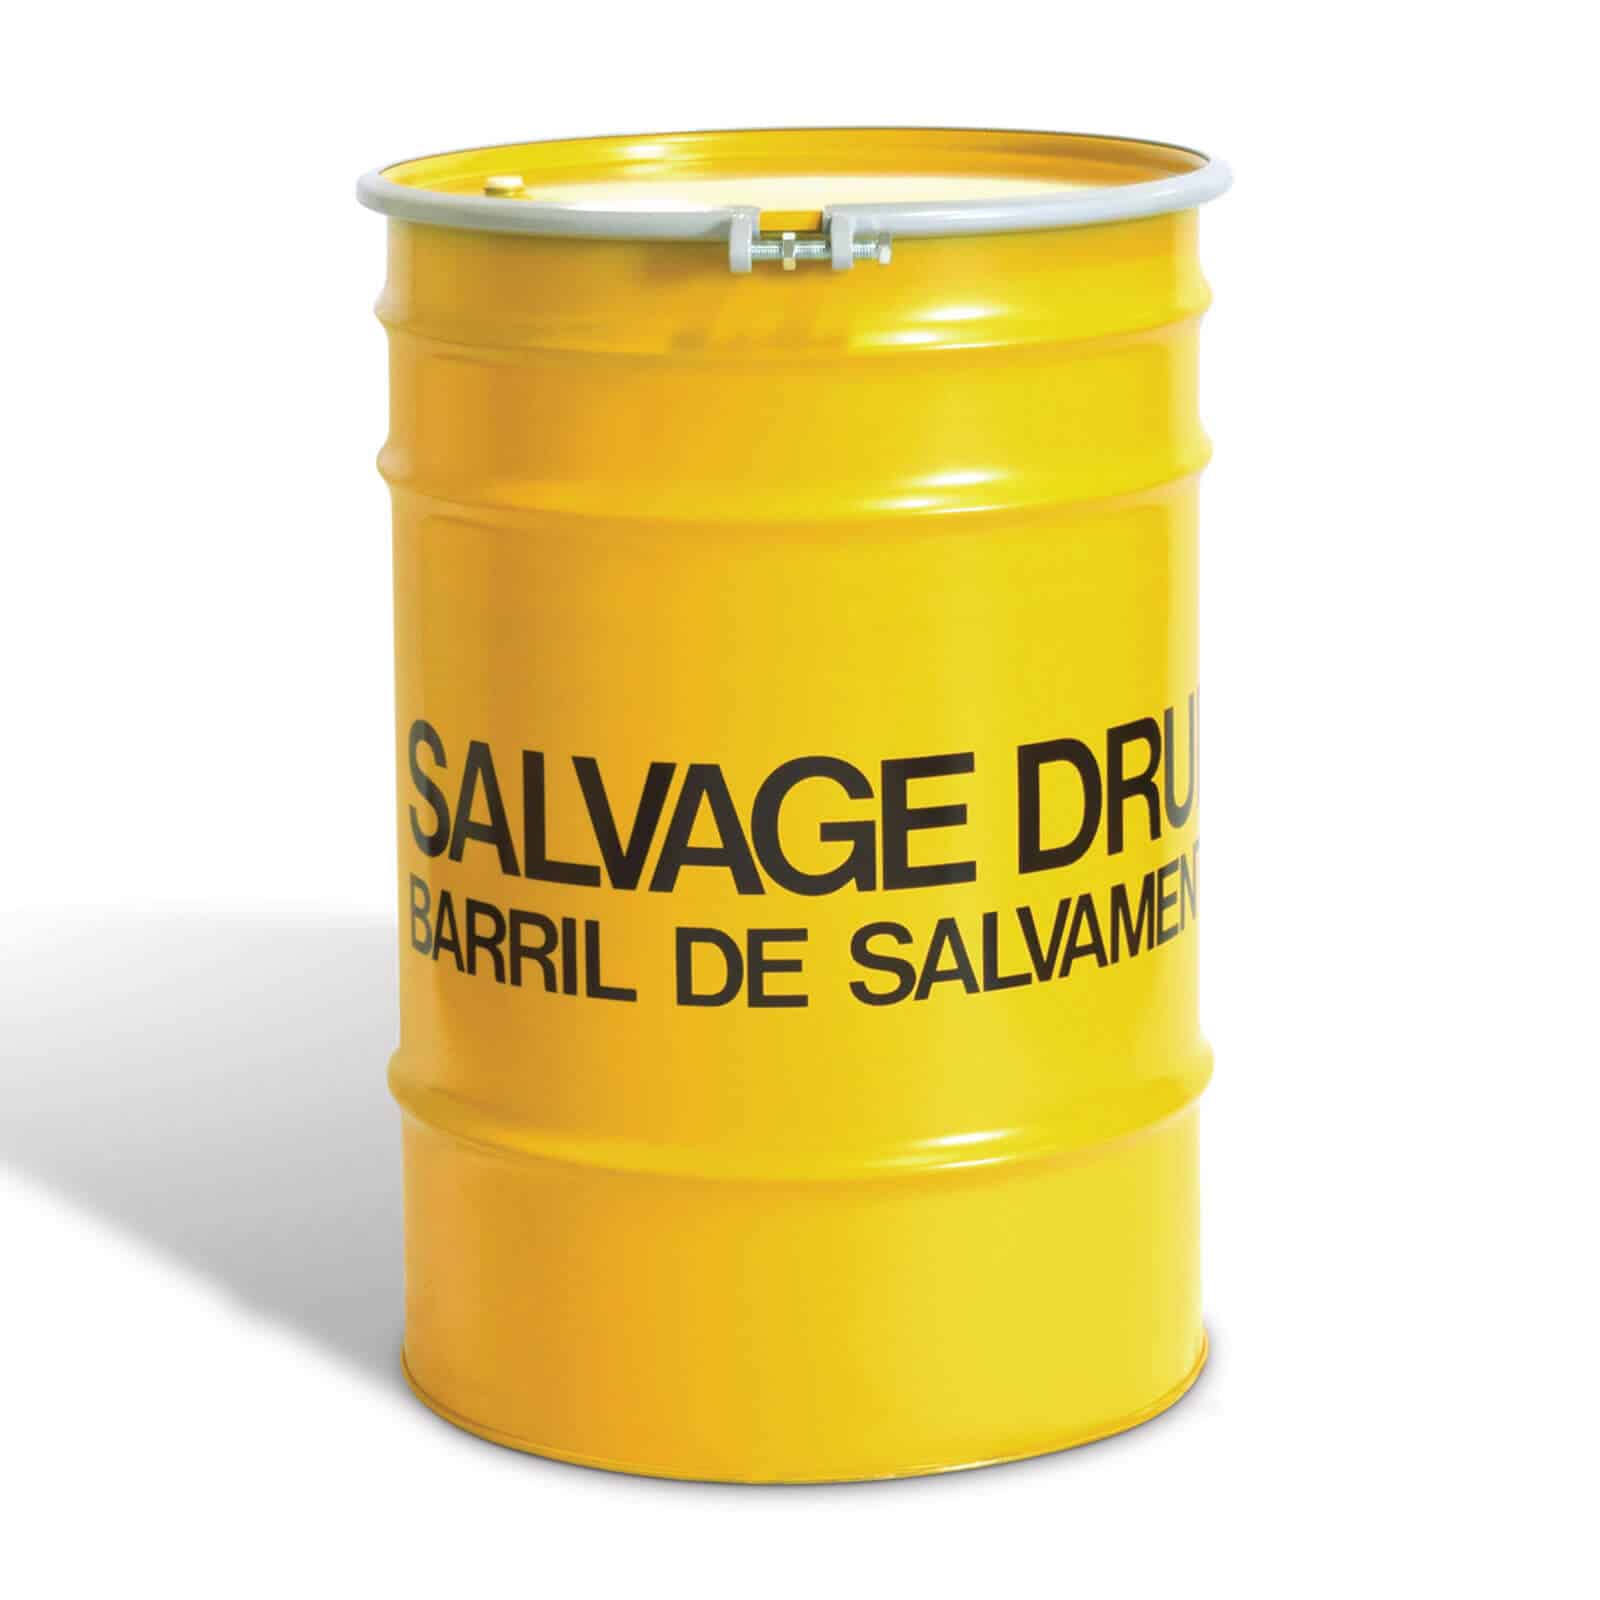 greif salvage drum - a yellow steel drum designed to encase a leaking barrel of plastic, steel, or other material to contain leakage